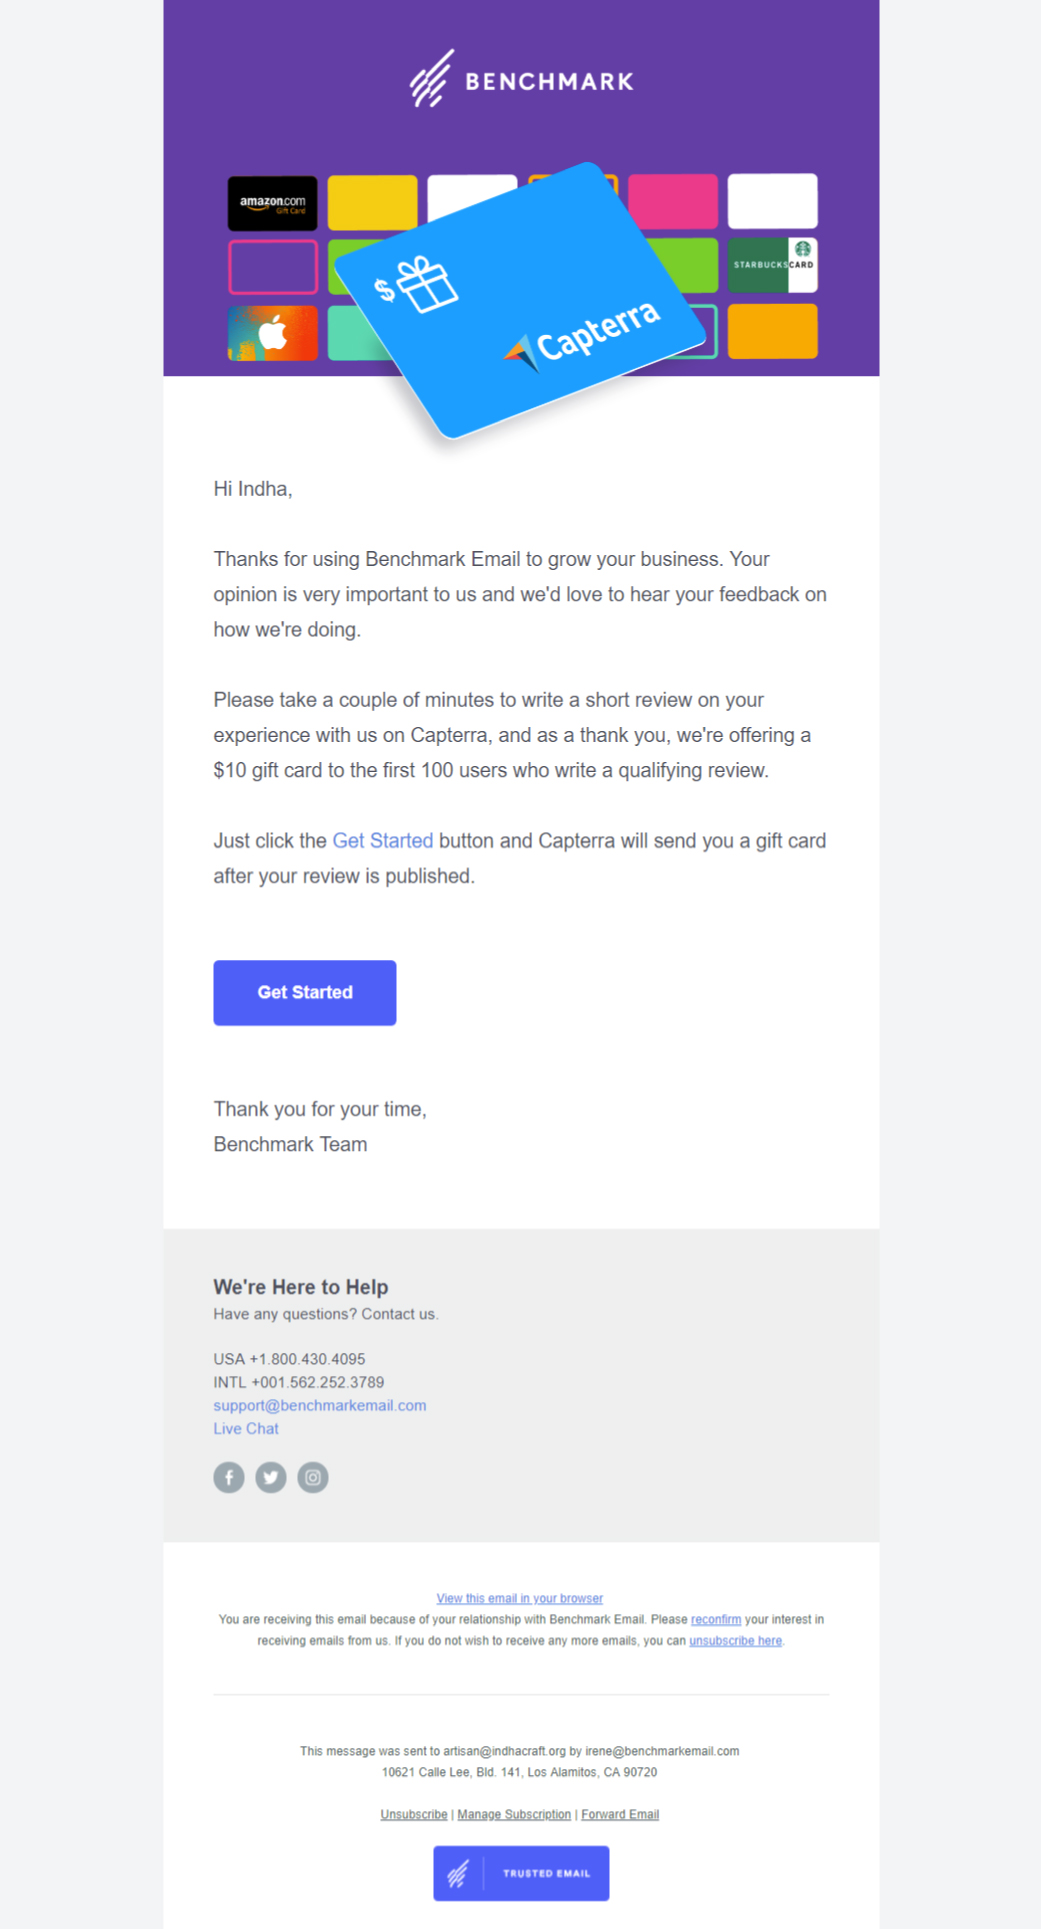 Benchmark Email's Review Request email